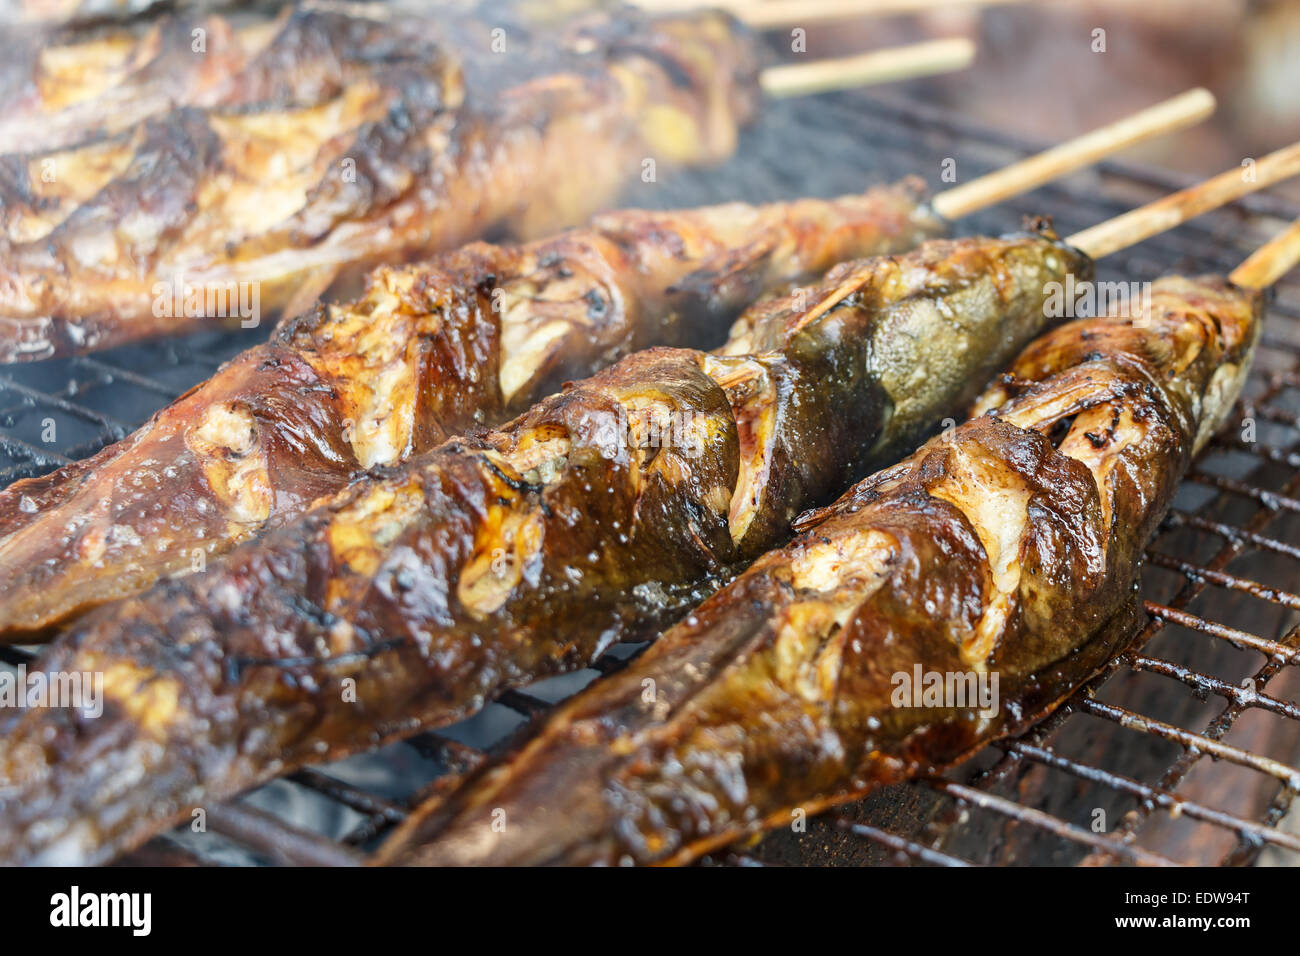 catfishs were roasted on grill (native food in Thailand) Stock Photo